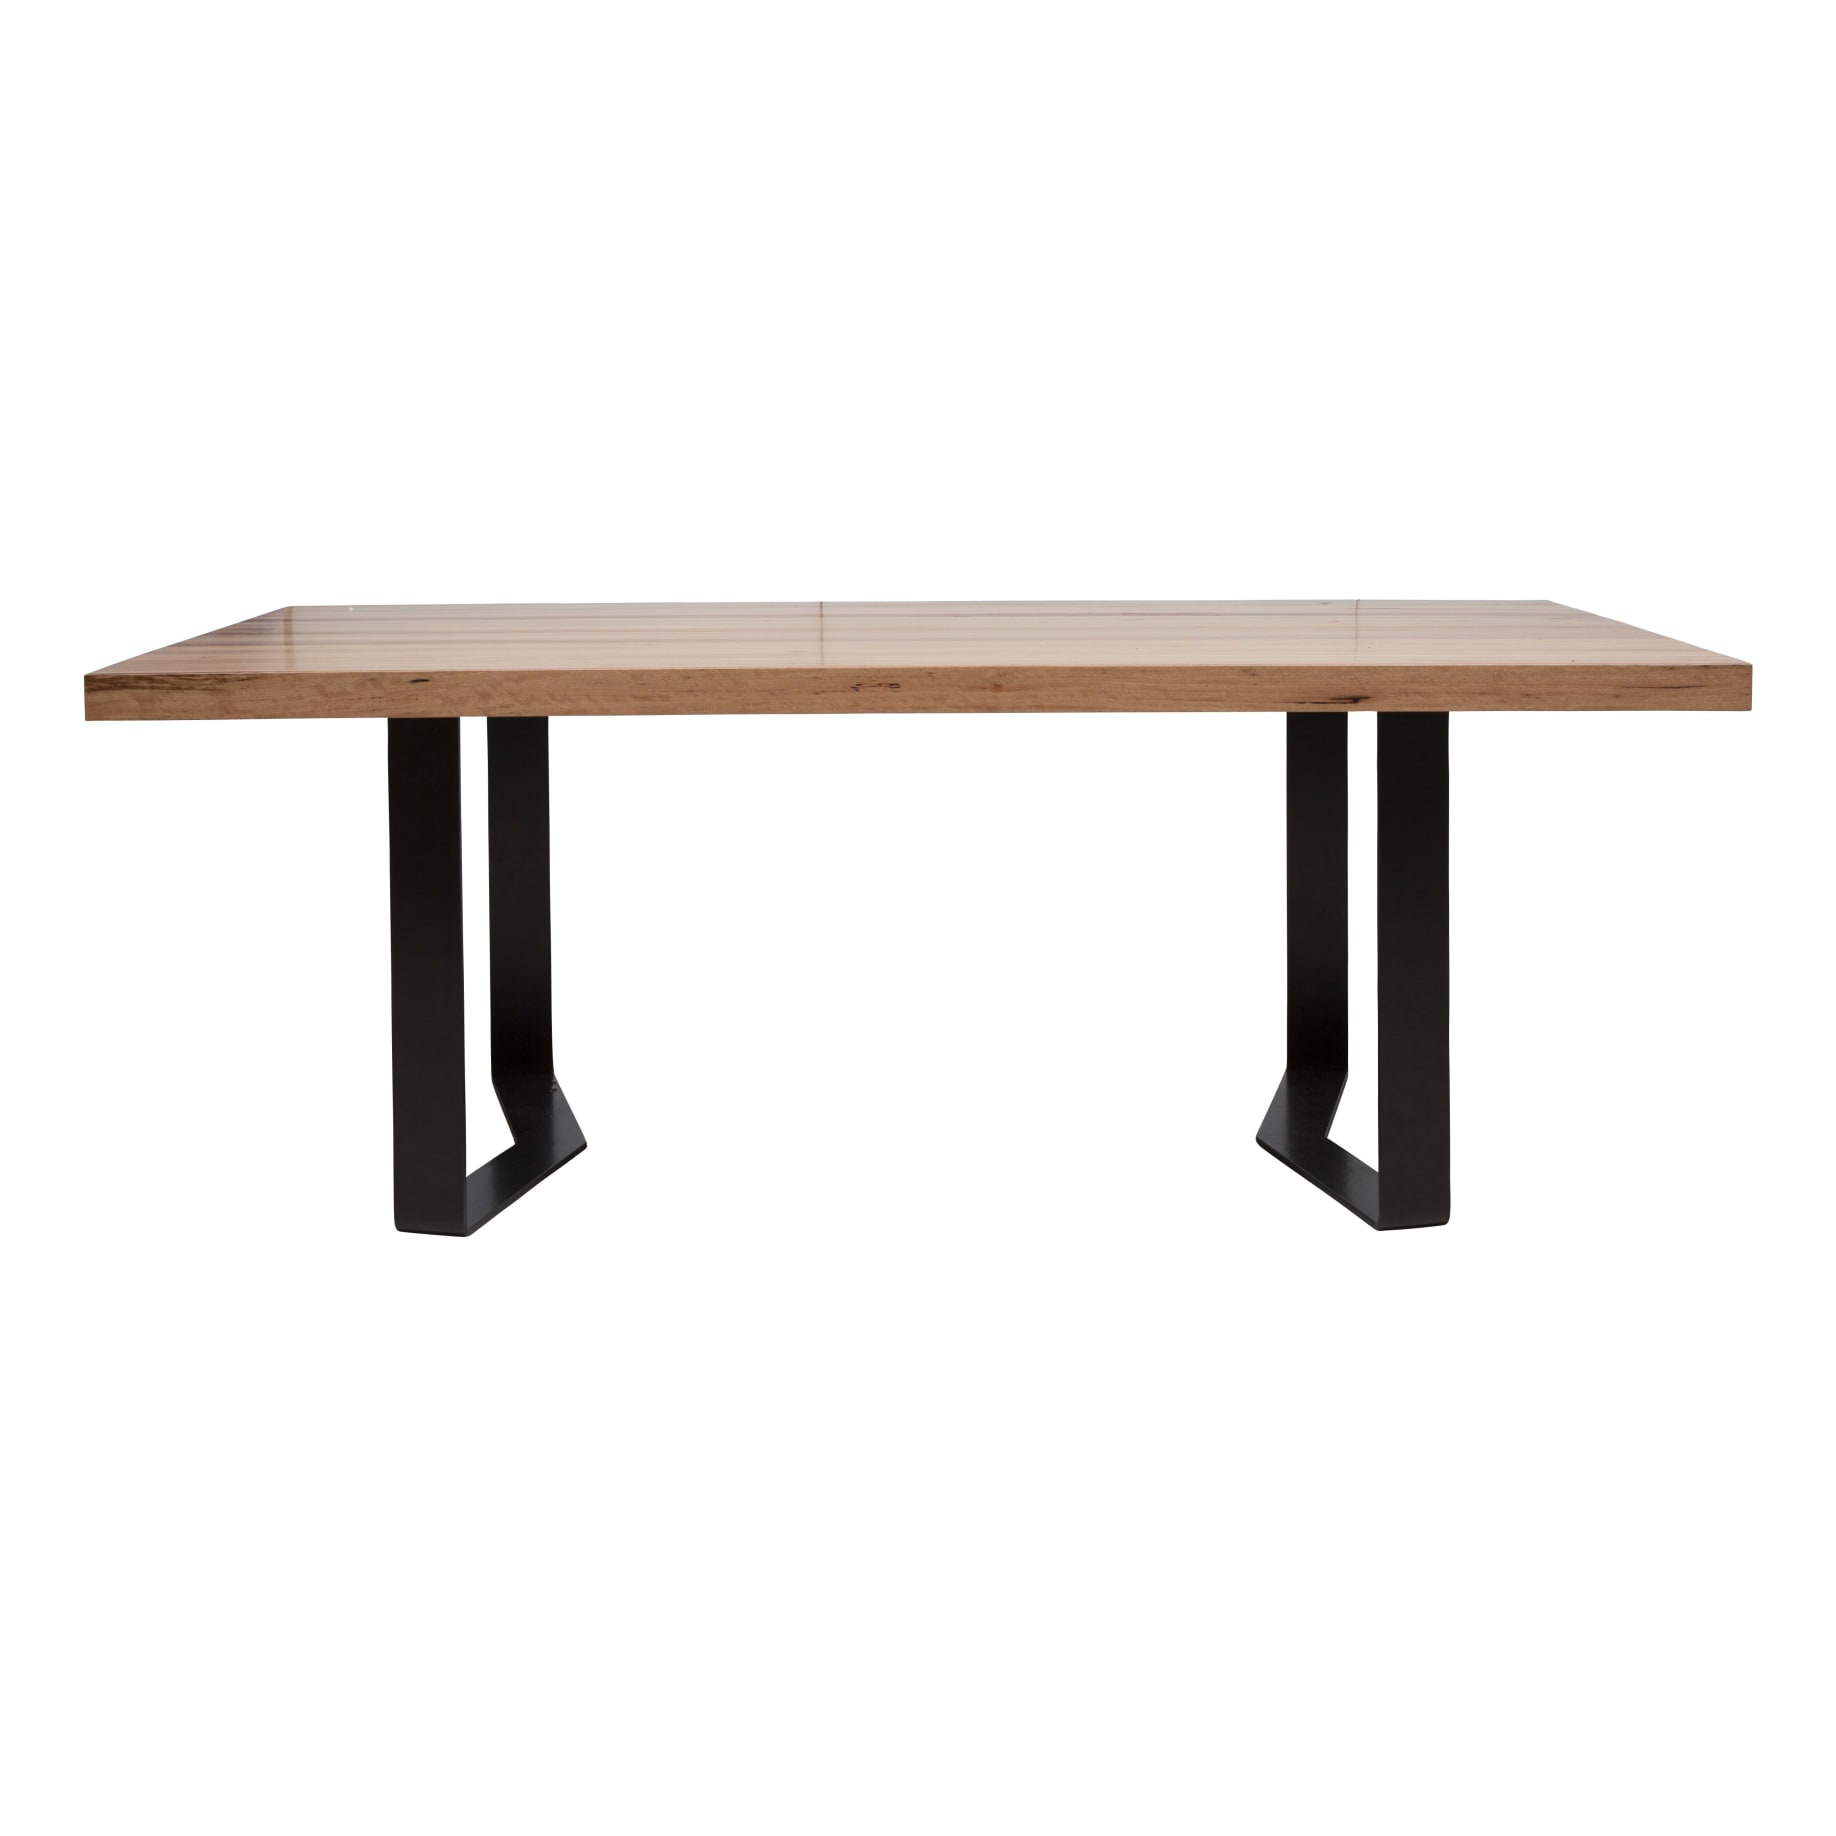 Abbey Dining Table 300cm in Australian Timbers